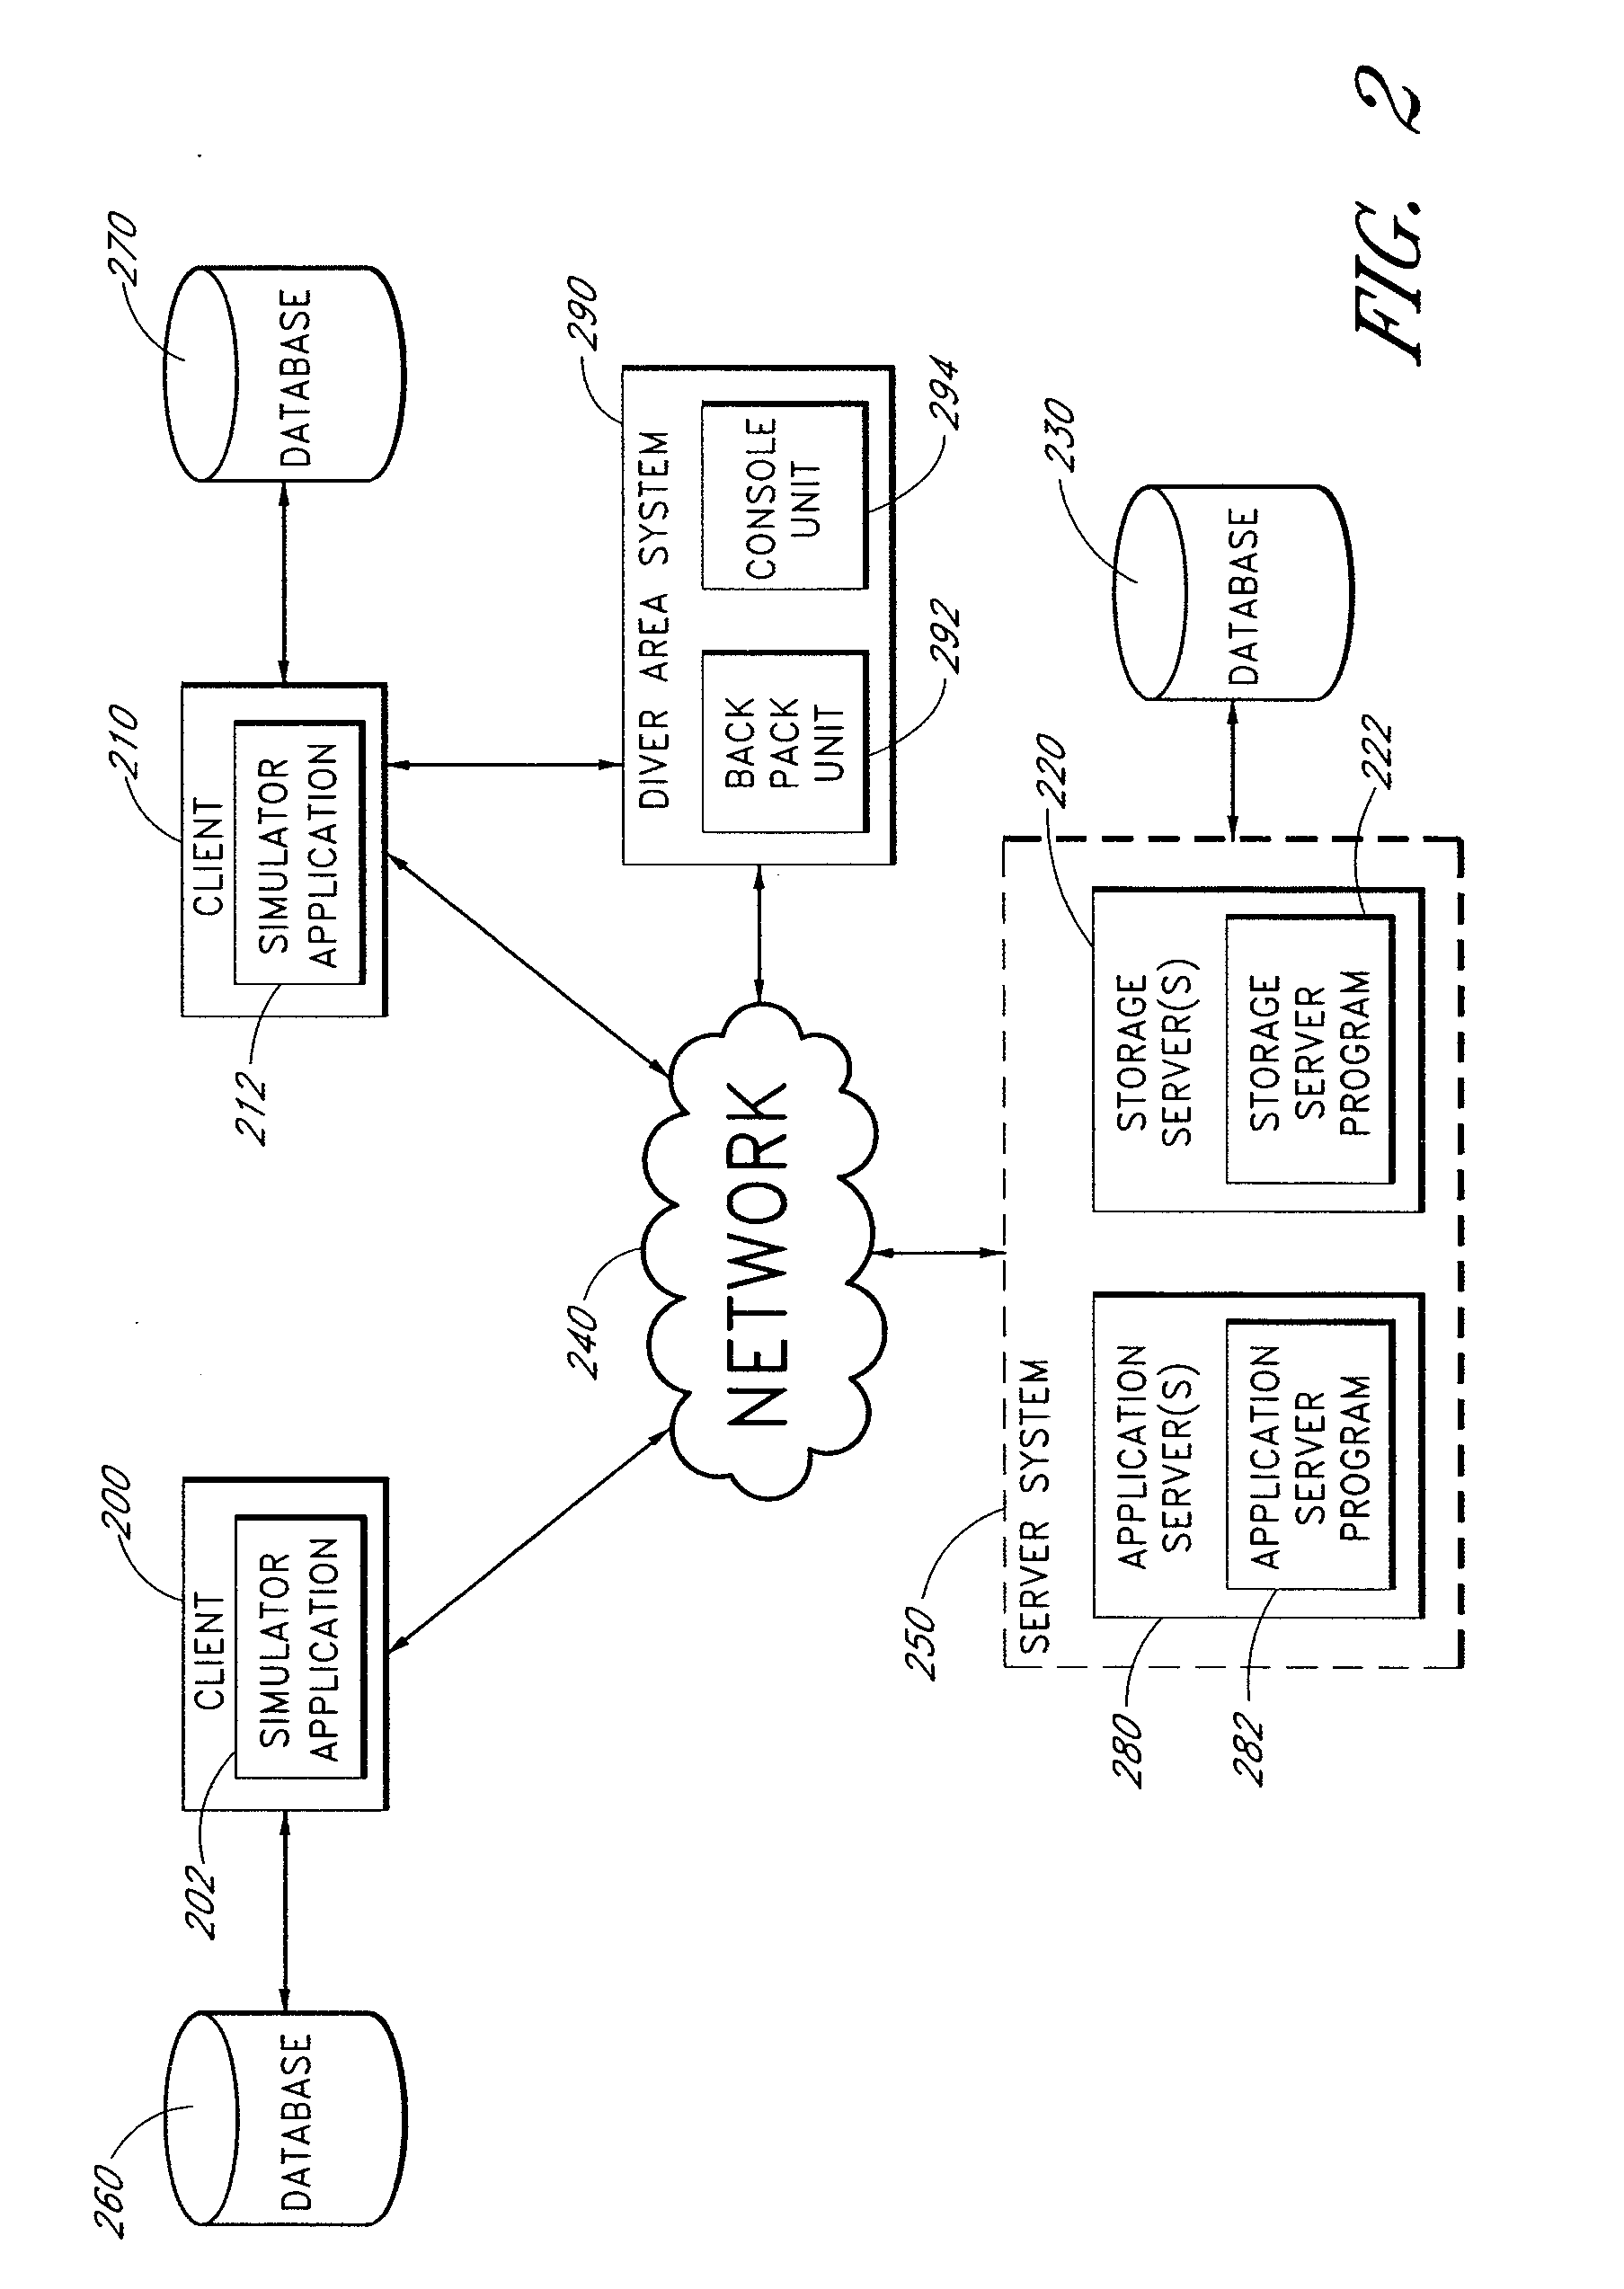 Scuba diving device providing underwater navigation and communication capability